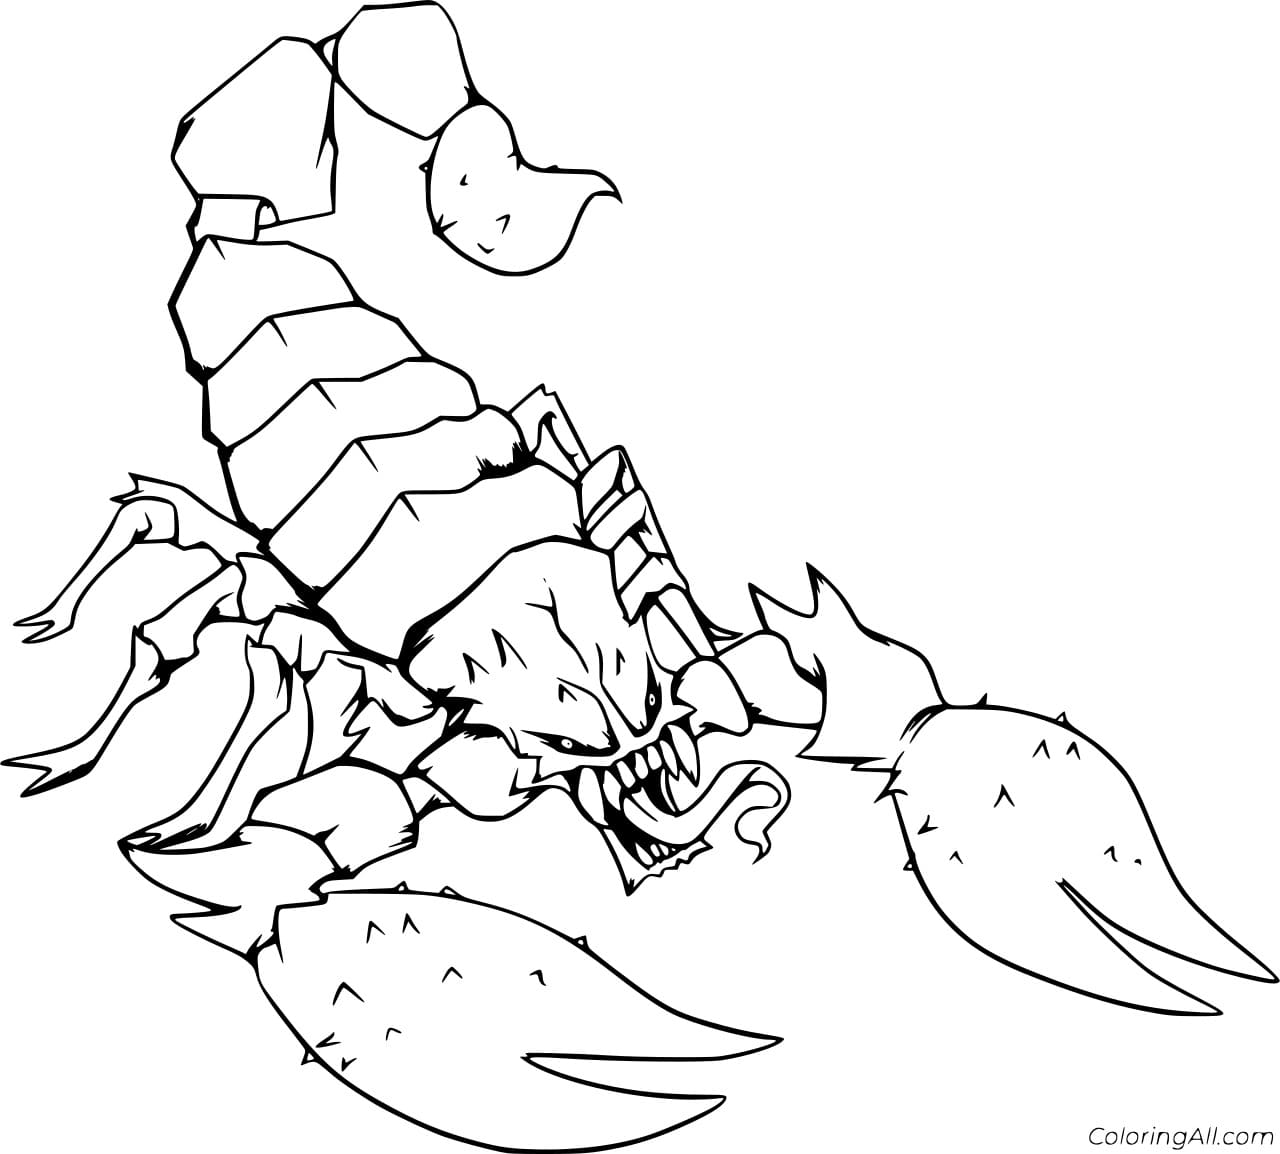 Fierce Scorpion Free Printable Coloring Page